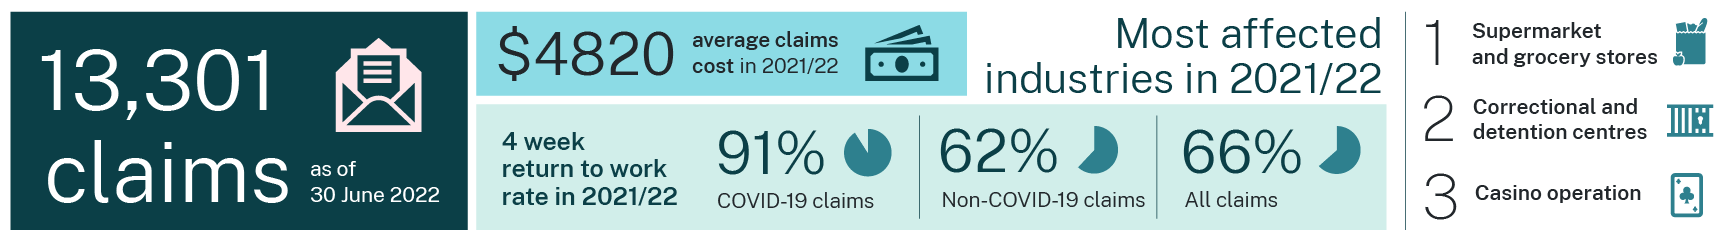 Graph showing the volume, performance, cost and most affected industries of COVID-19 claims in the NSW workers compensation system from 2019/20 to 2021/22